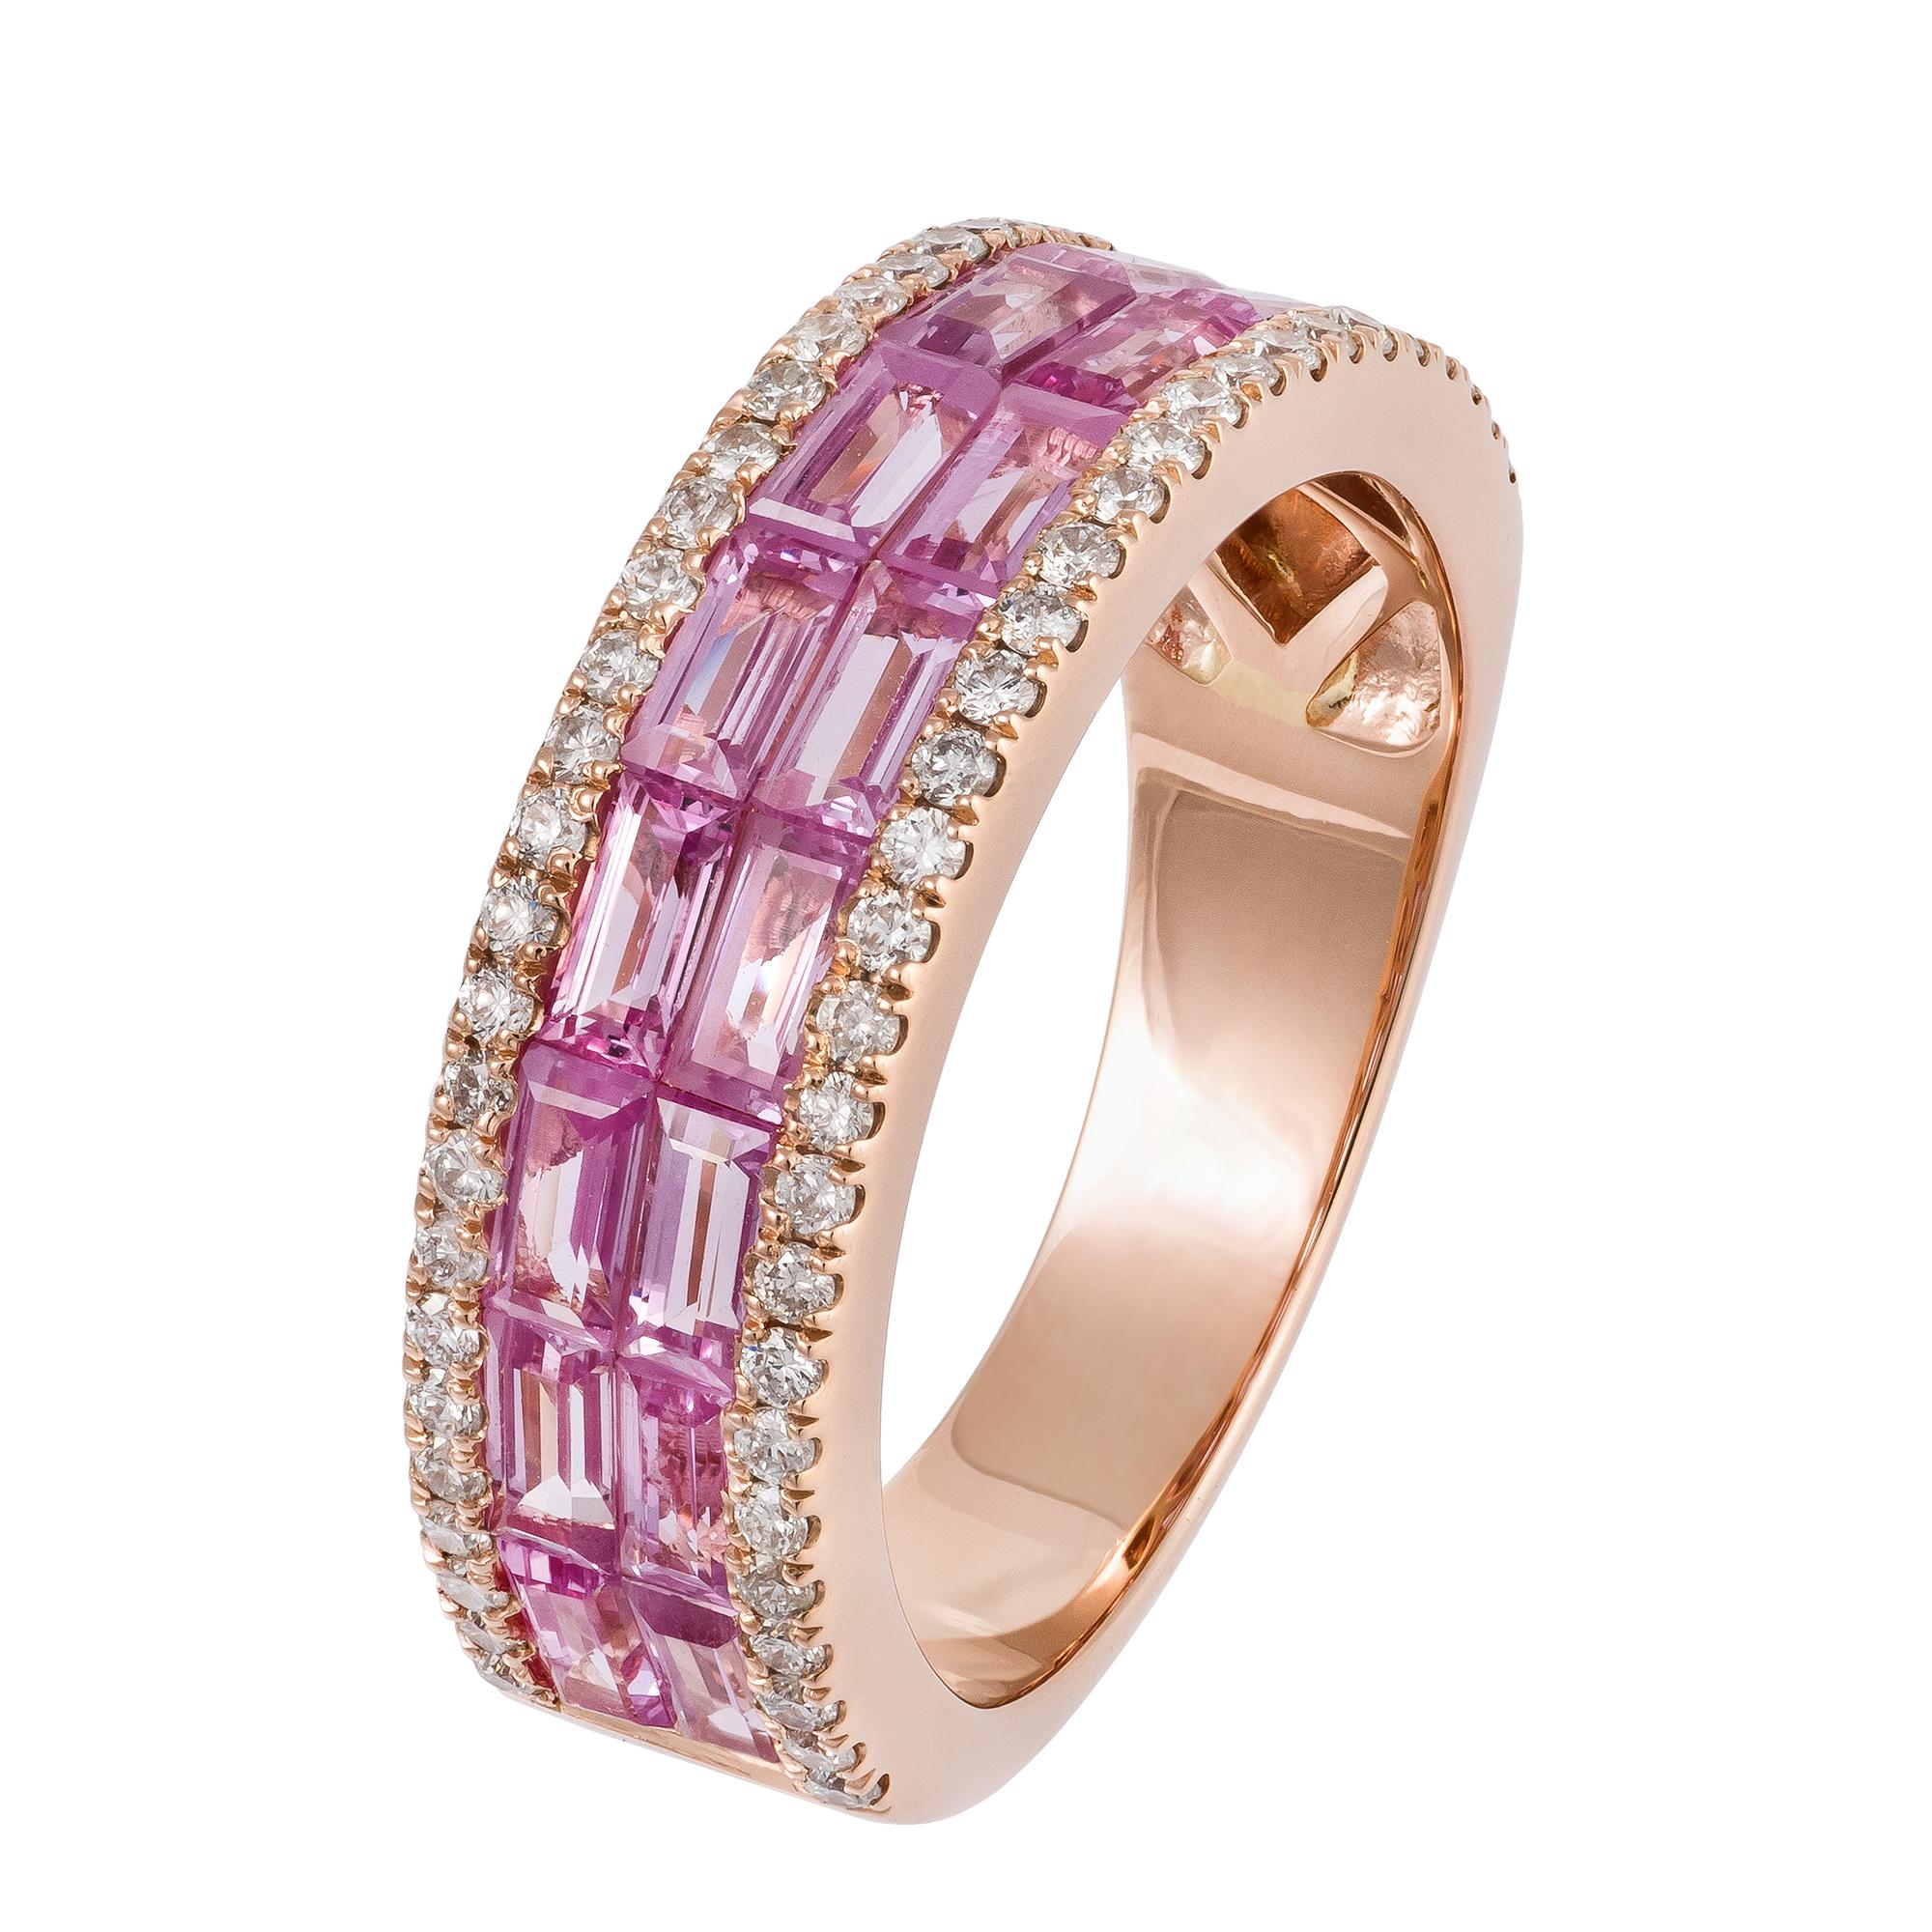 The Following Item we are offering is this Rare Important Radiant 18KT Gold Gorgeous Glittering and Sparkling Magnificent Fancy Shaped Tapered Baguette Pink Sapphire and Diamond Ring. Ring Contains almost 3CTS of Beautiful Fancy Emerald Cut Tapered